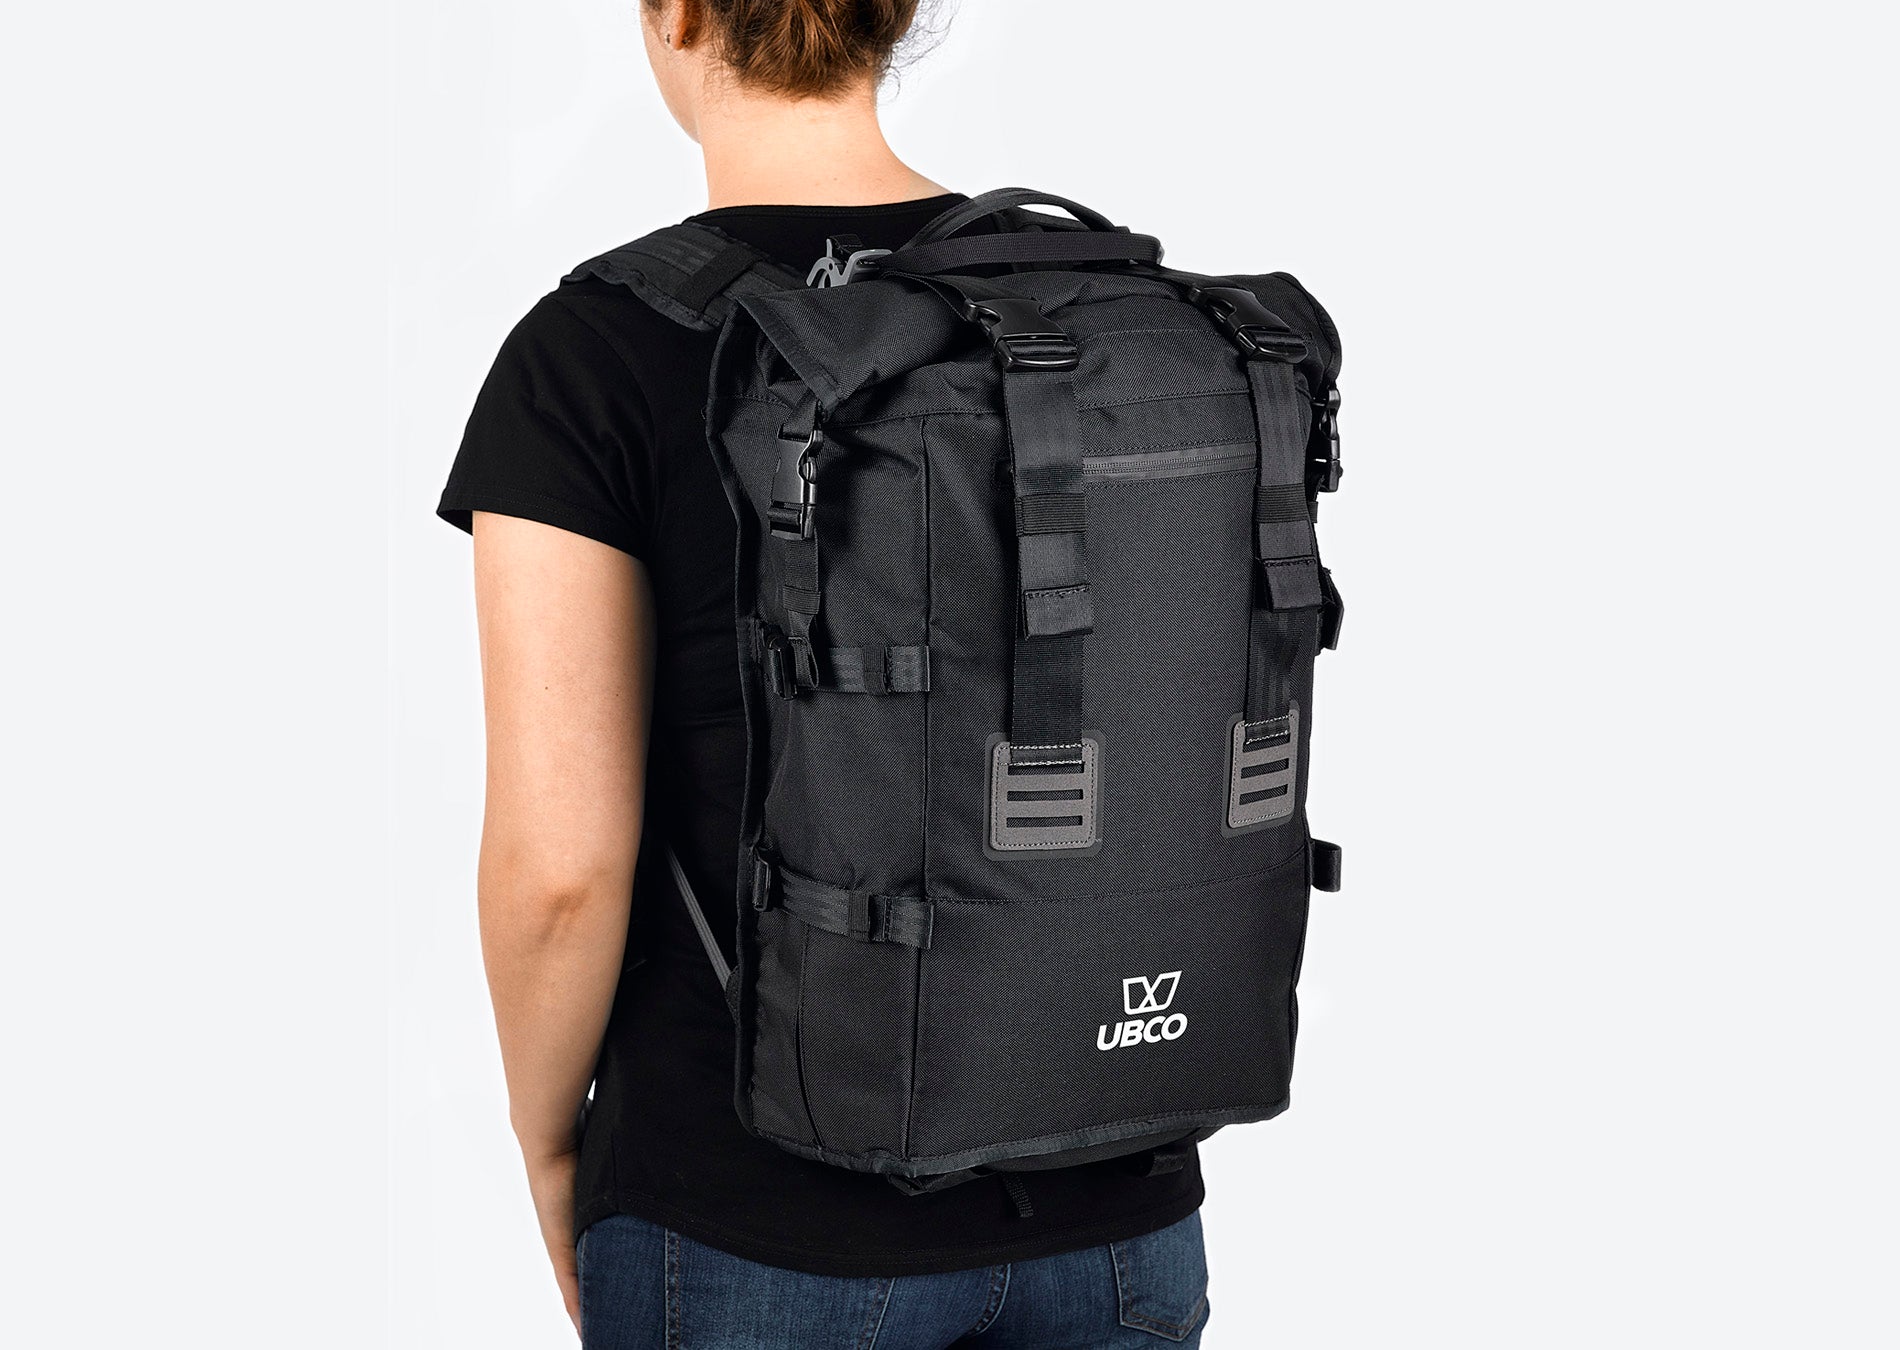 Black Pannier Backpack for Ubco 2x2 Electric Adventure Bike. Backpack is being modeled on a person's back